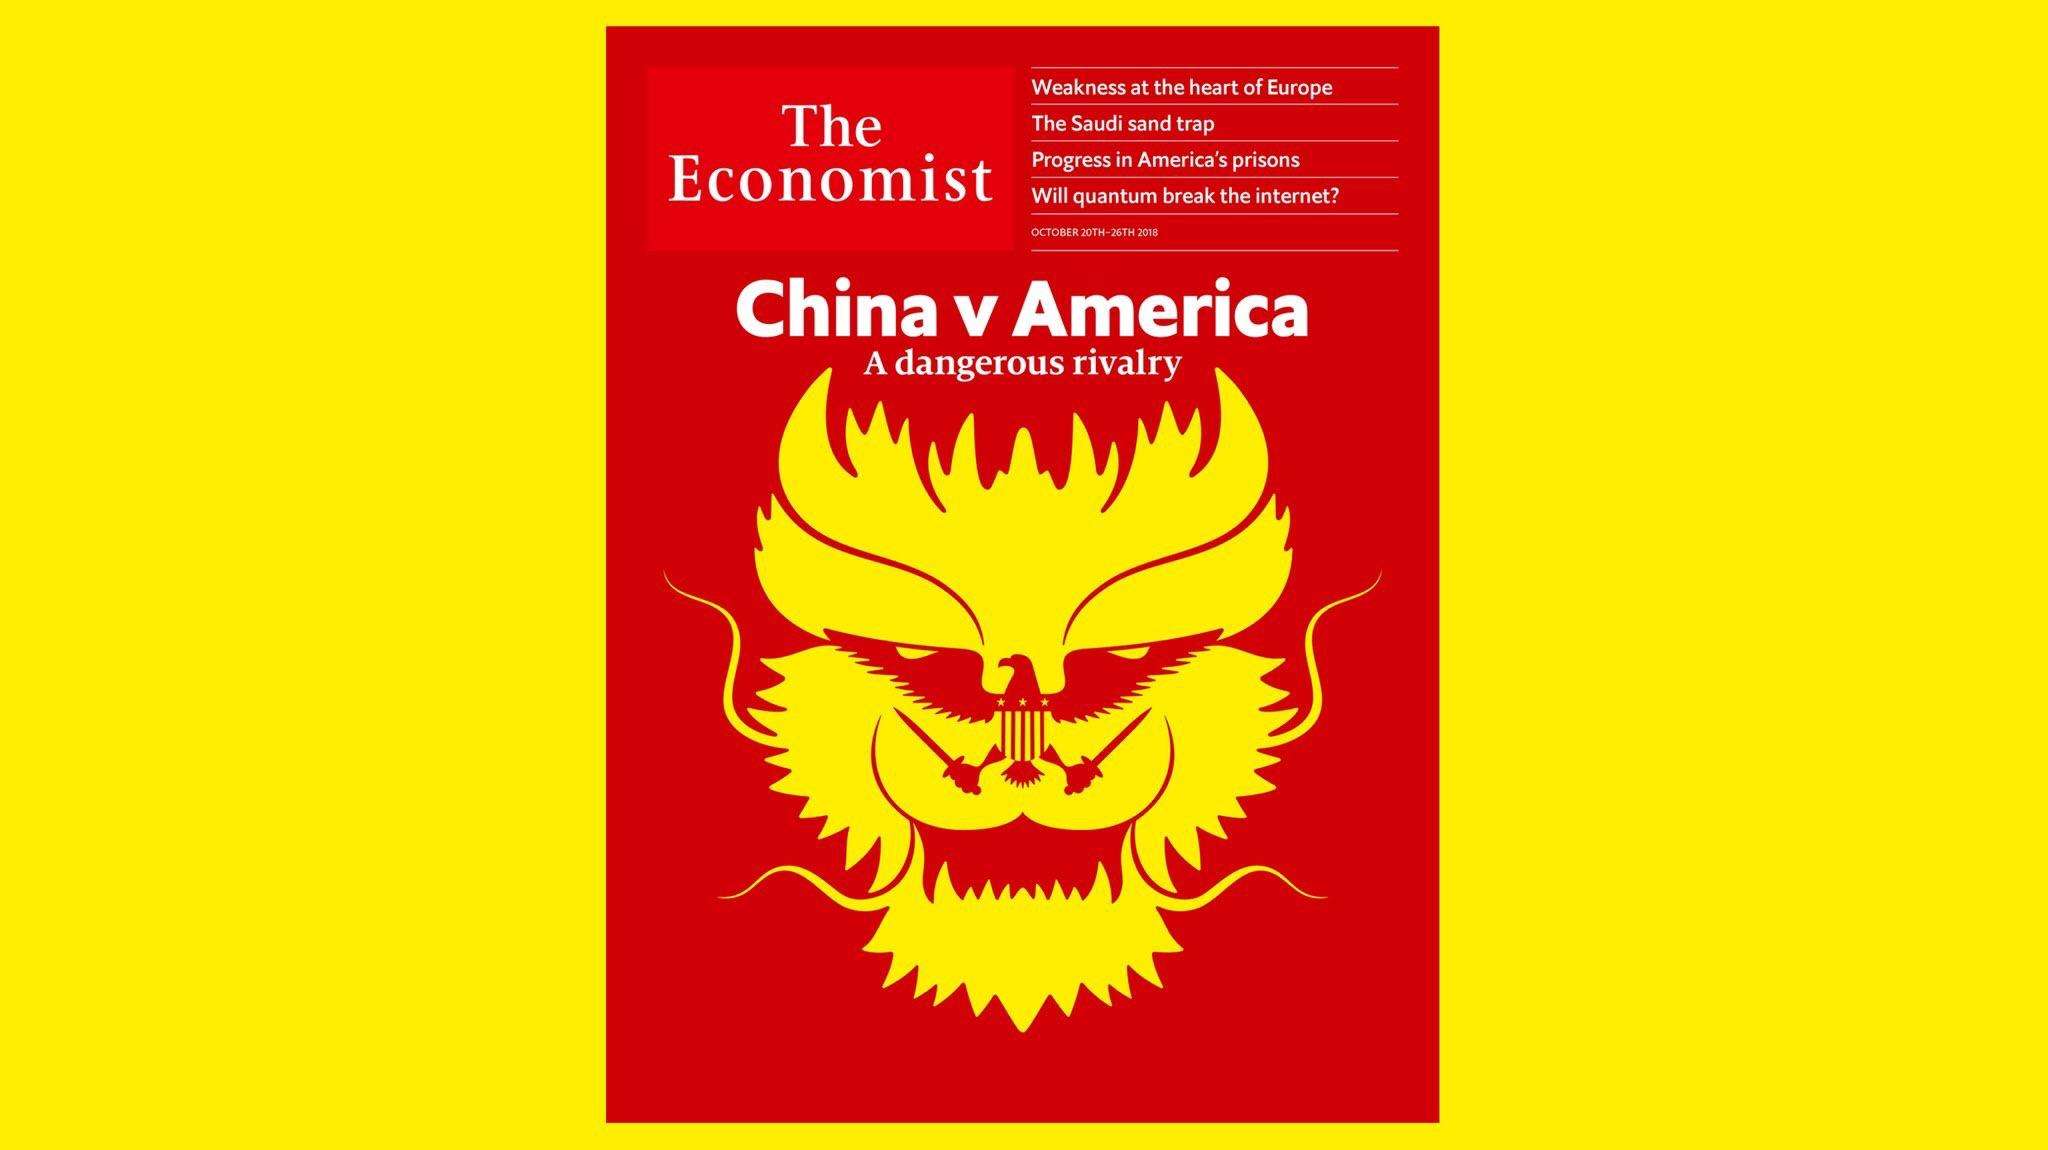 image showing The Economist’s latest cover